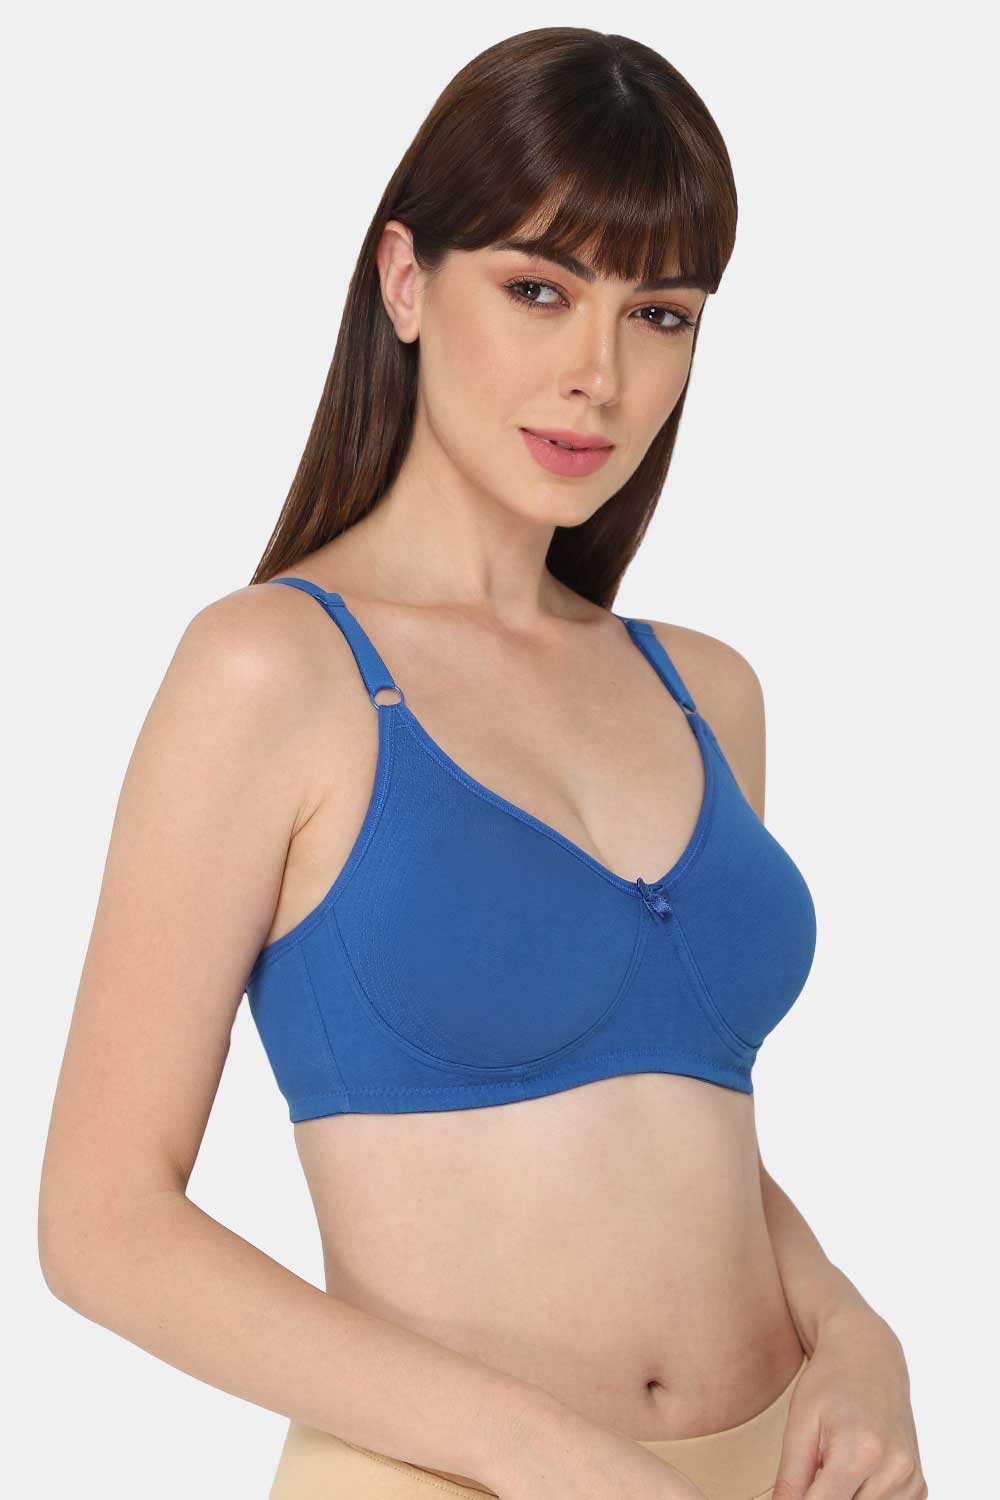 Buy online Pink Cotton Blend Tshirt Bra from lingerie for Women by